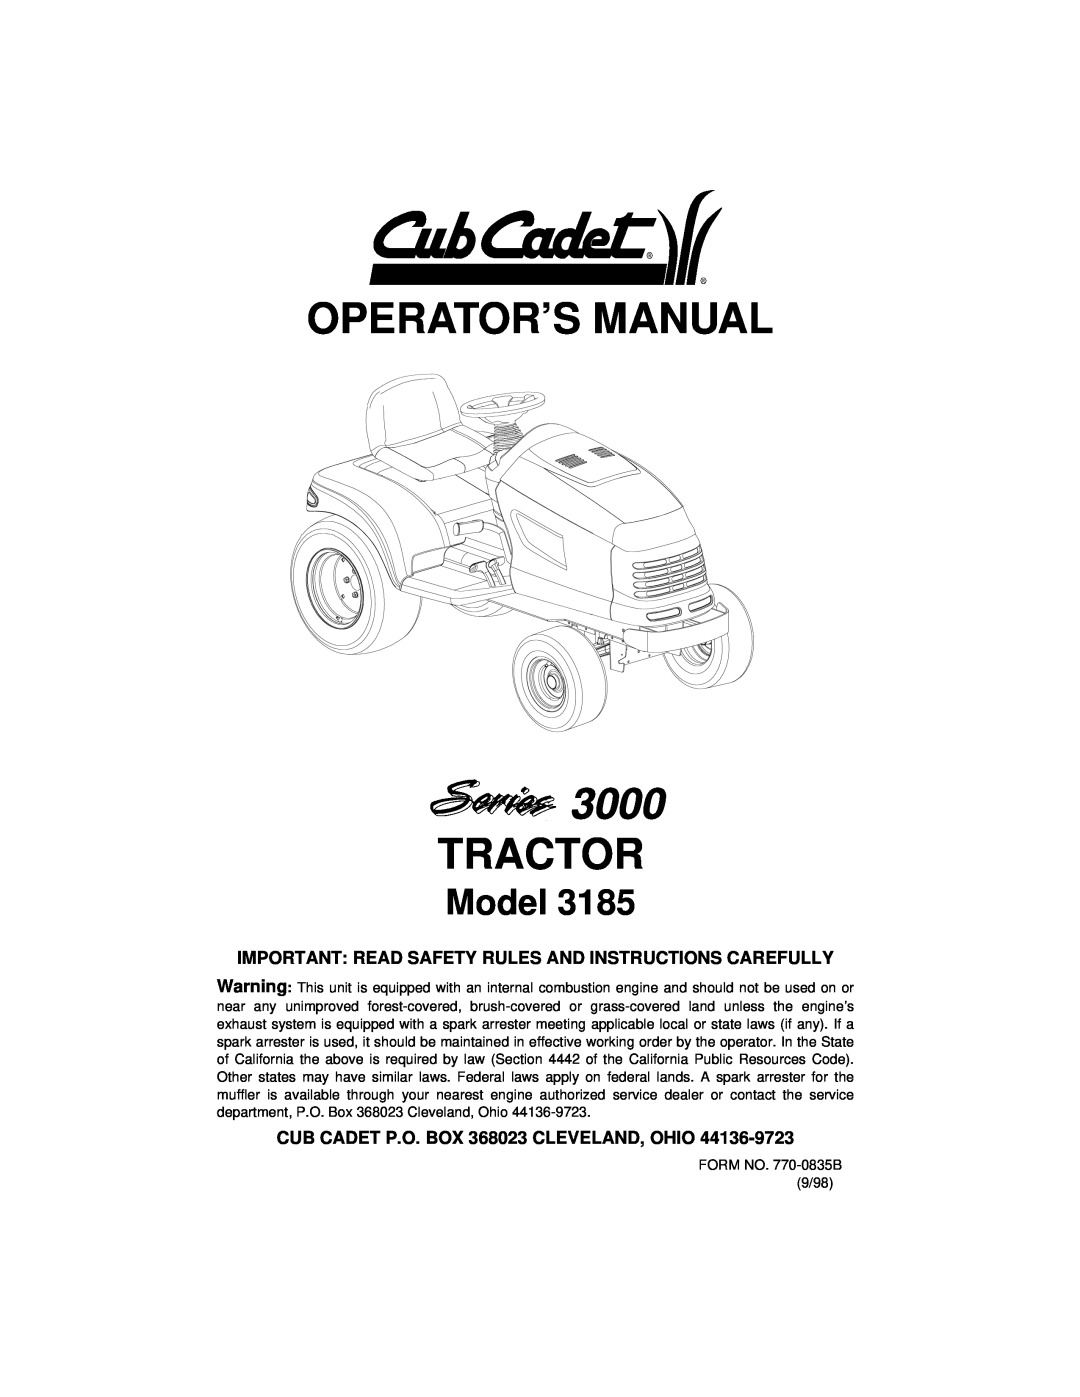 Cub Cadet 3185 manual Operator’S Manual, 3000, Tractor, Model, Important Read Safety Rules And Instructions Carefully 